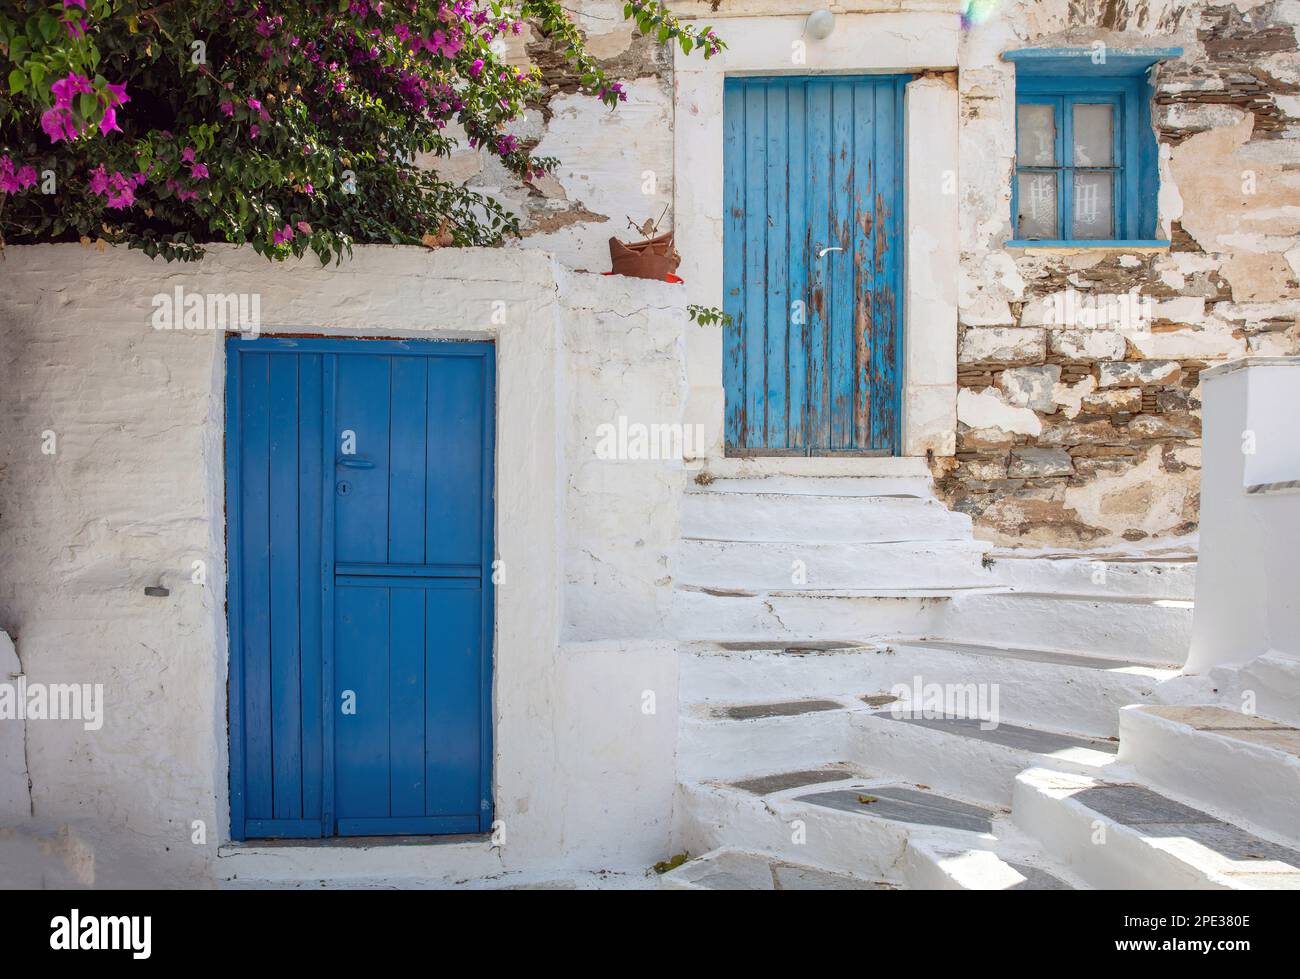 Greece. Tinos island of art, Cycladic architecture at Pyrgos village, bougainvillea on whitewashed wall, blue door and windows, sunny day. Stock Photo